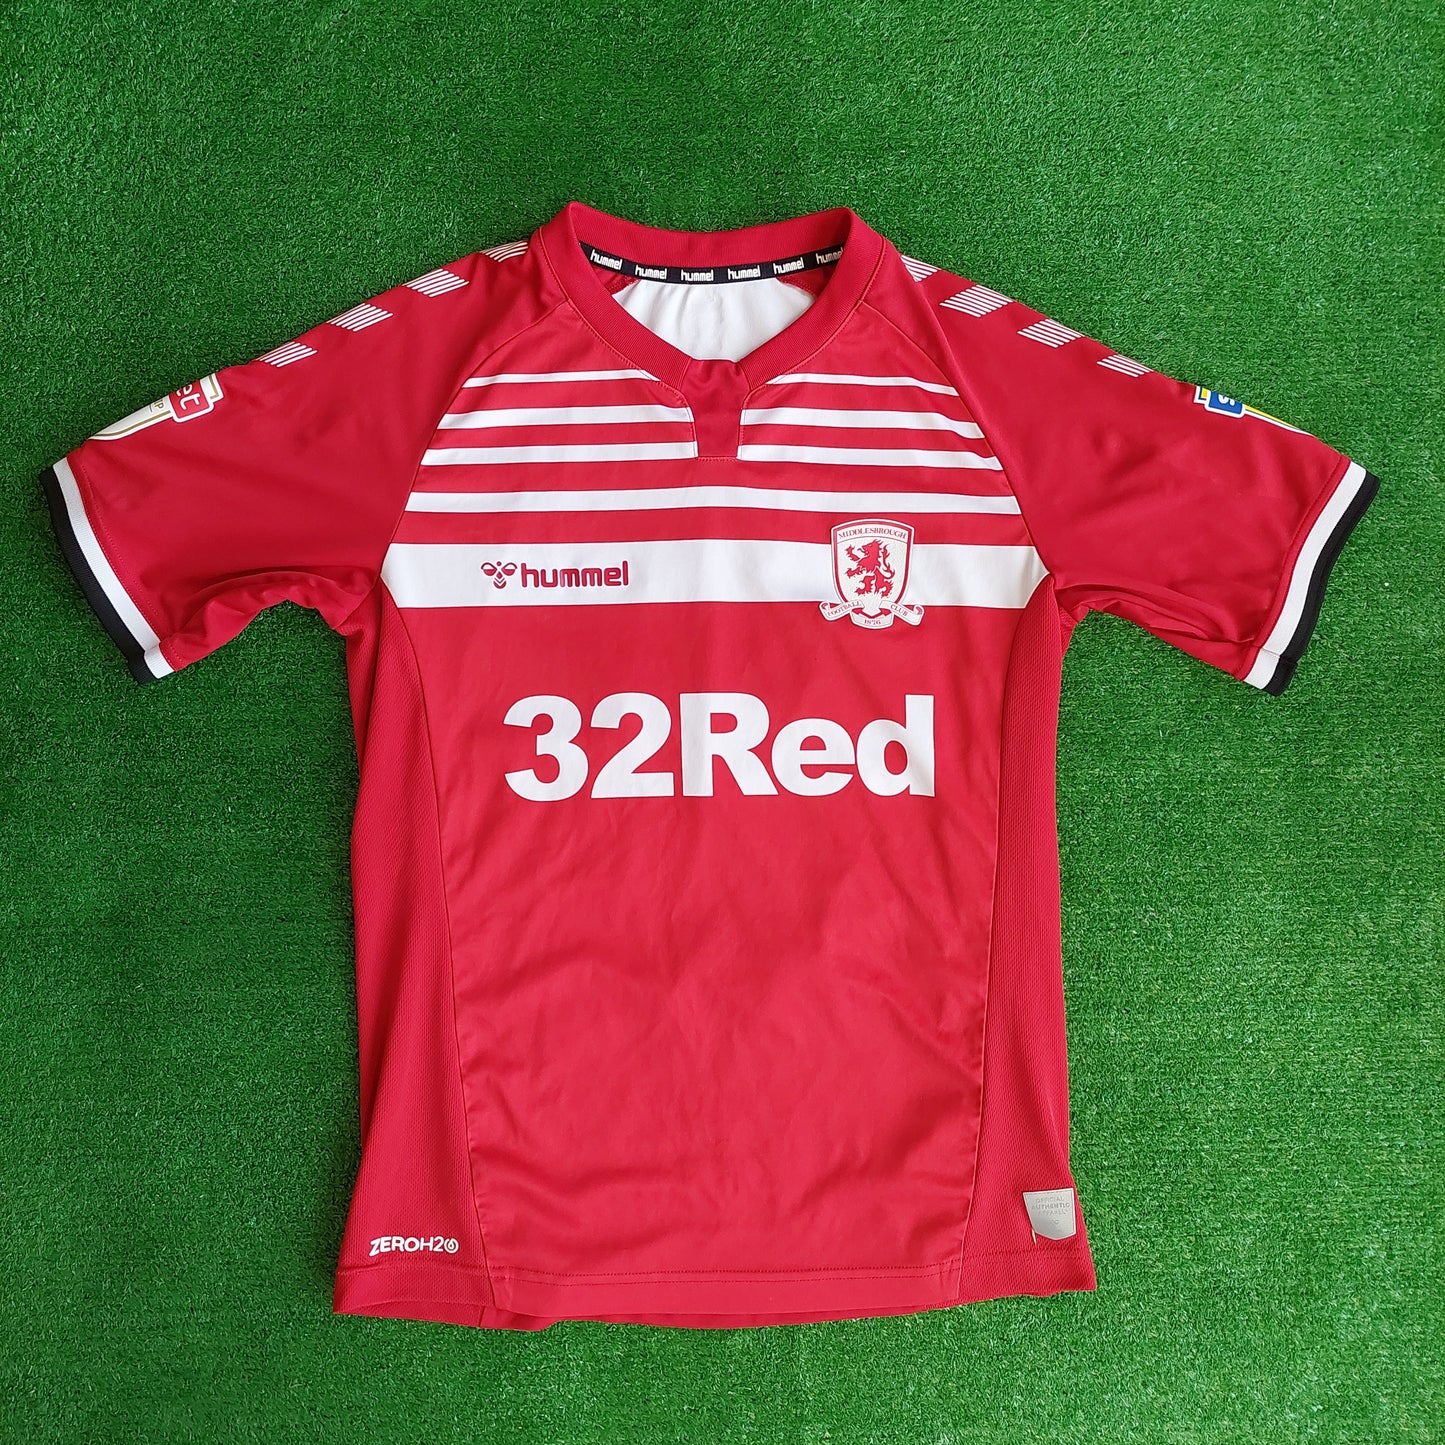 Middlesbrough 2019/20 “Bola #27” Home Shirt (Excellent) - Size S